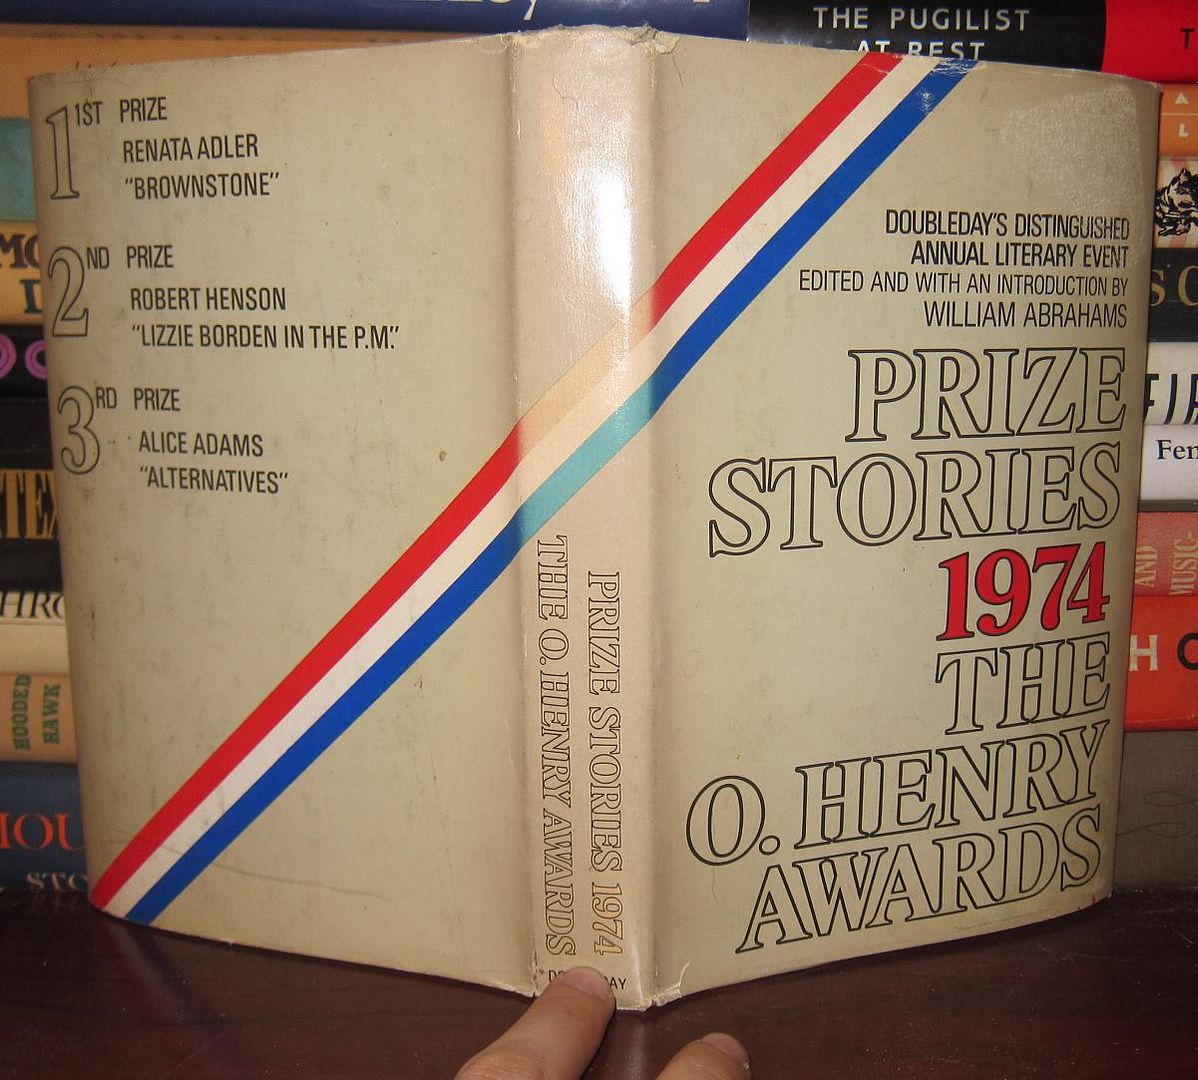 ABRAHAMS, WILLIAM - Prize Stories 1974 the o. Henry Awards